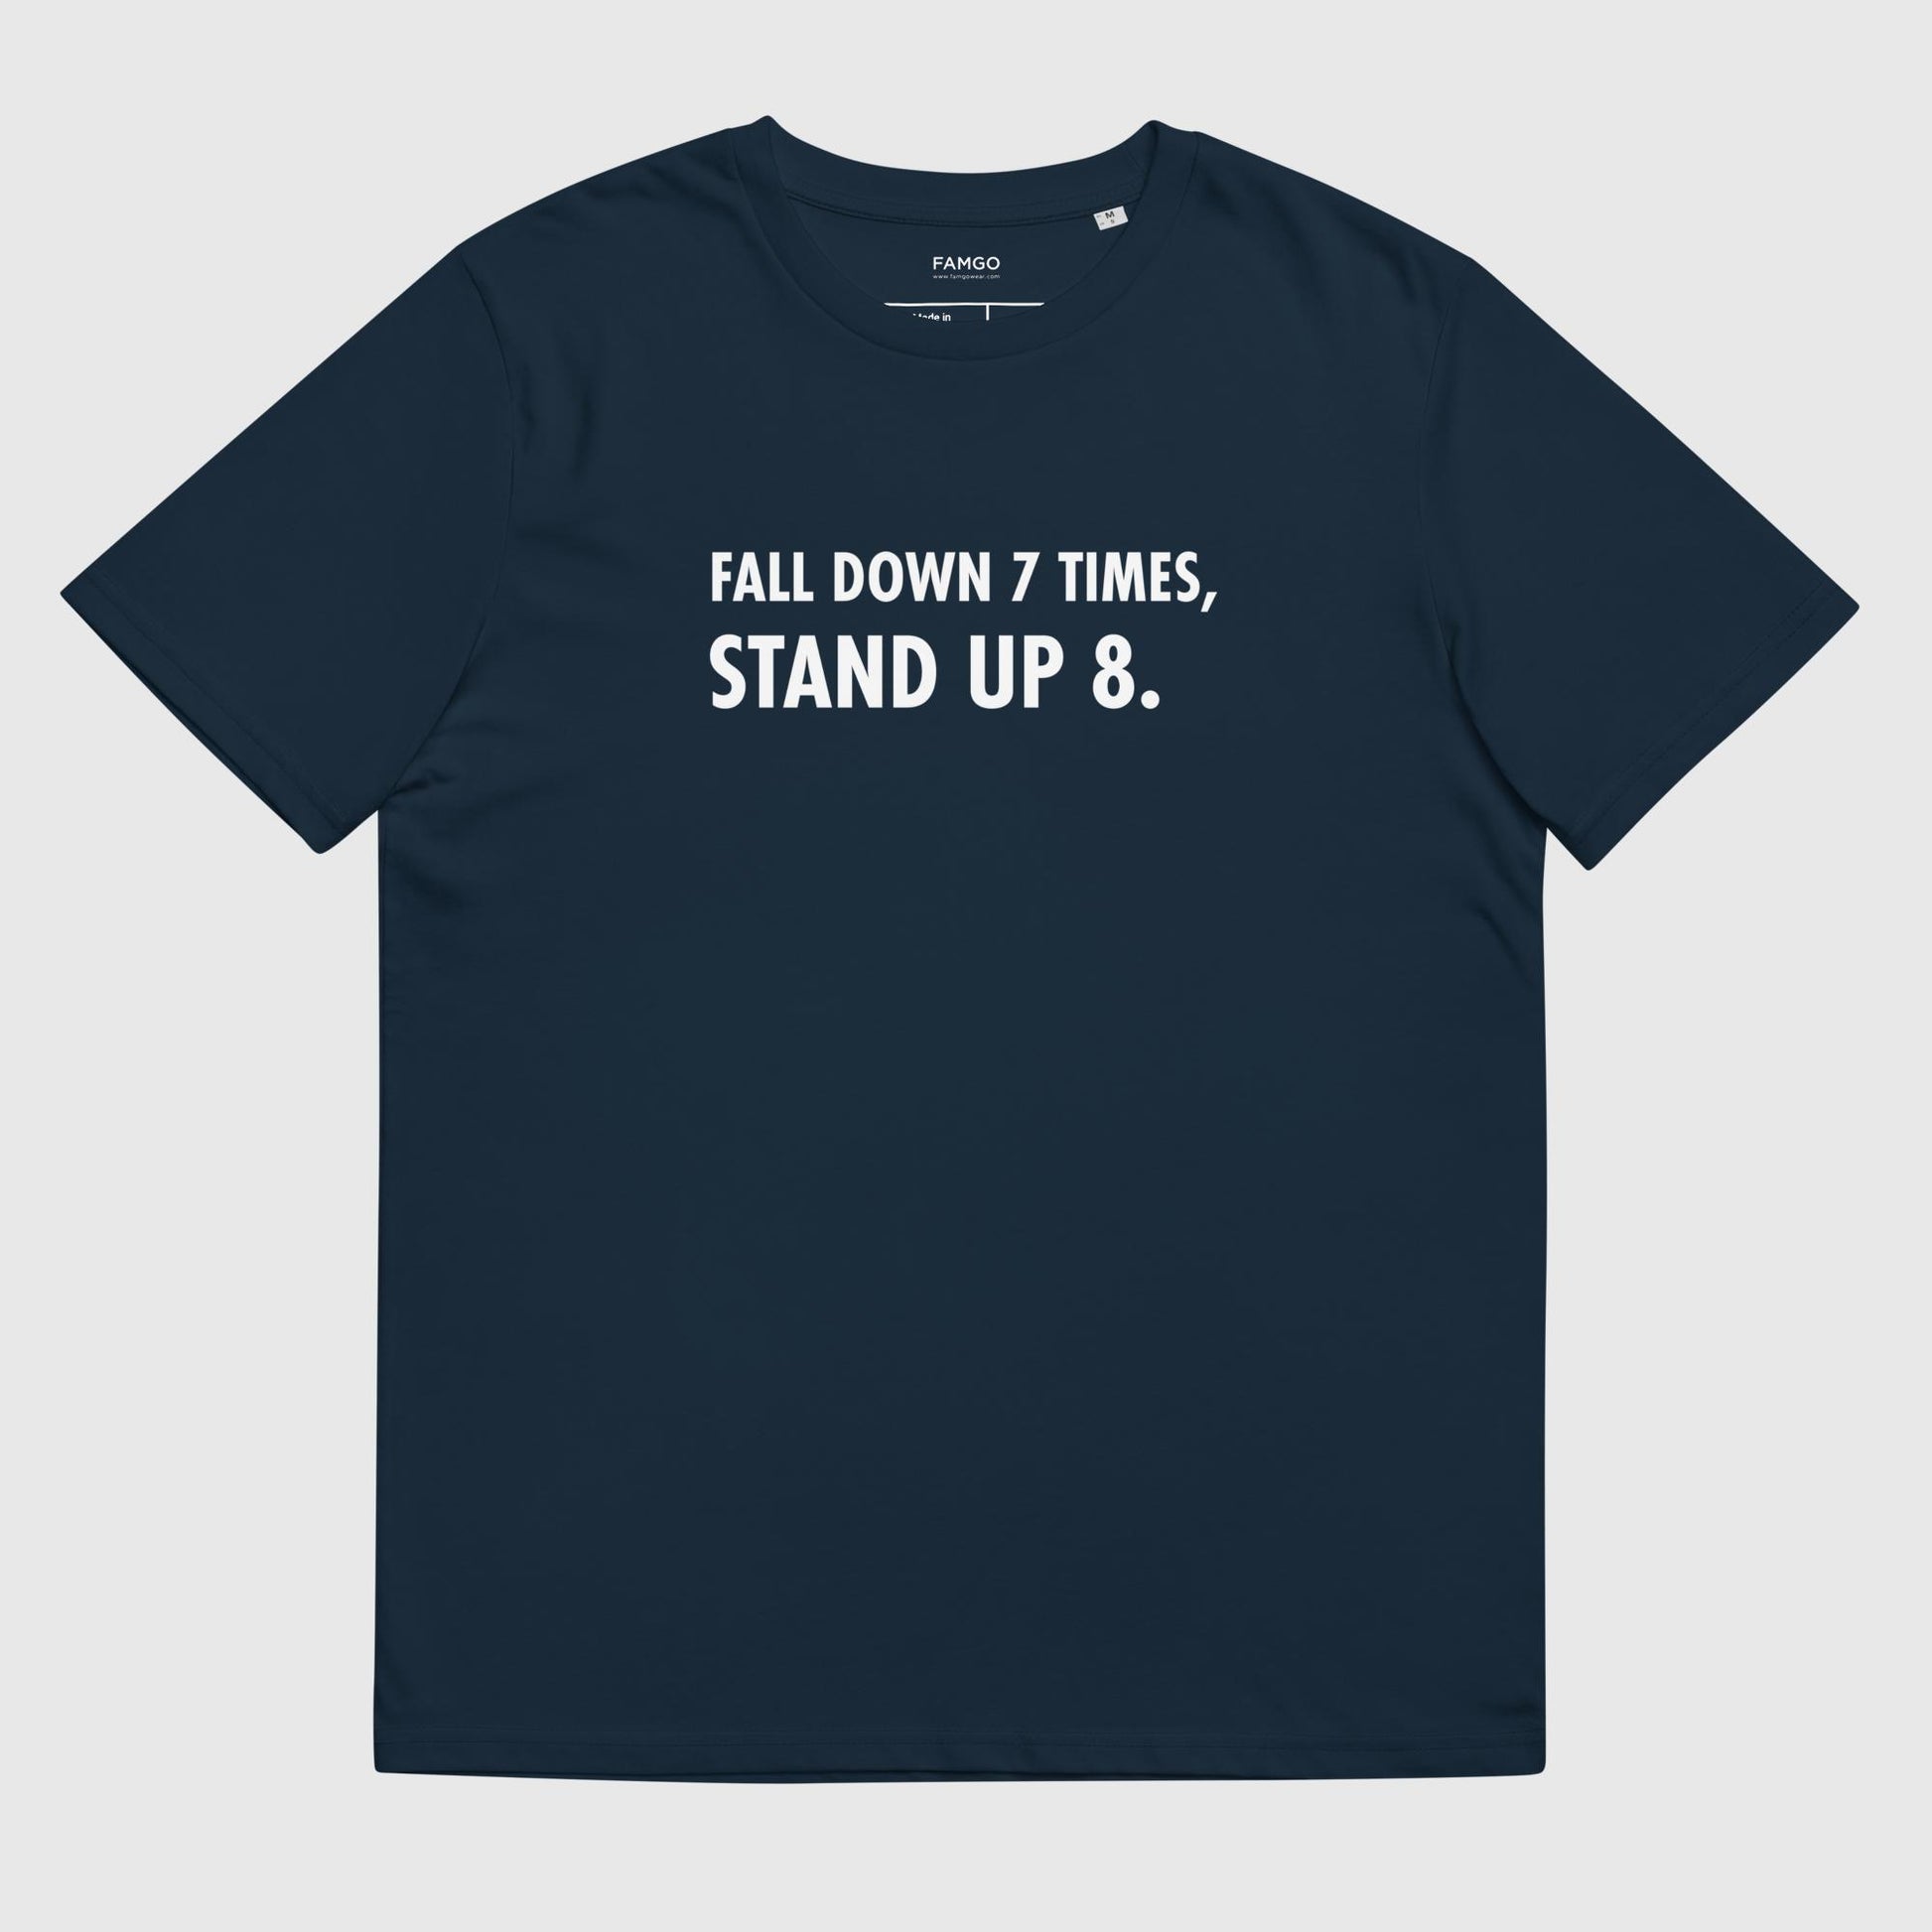 Men's navy organic cotton t-shirt that features the Japanese proverb "Fall Down 7 Times, Stand Up 8."